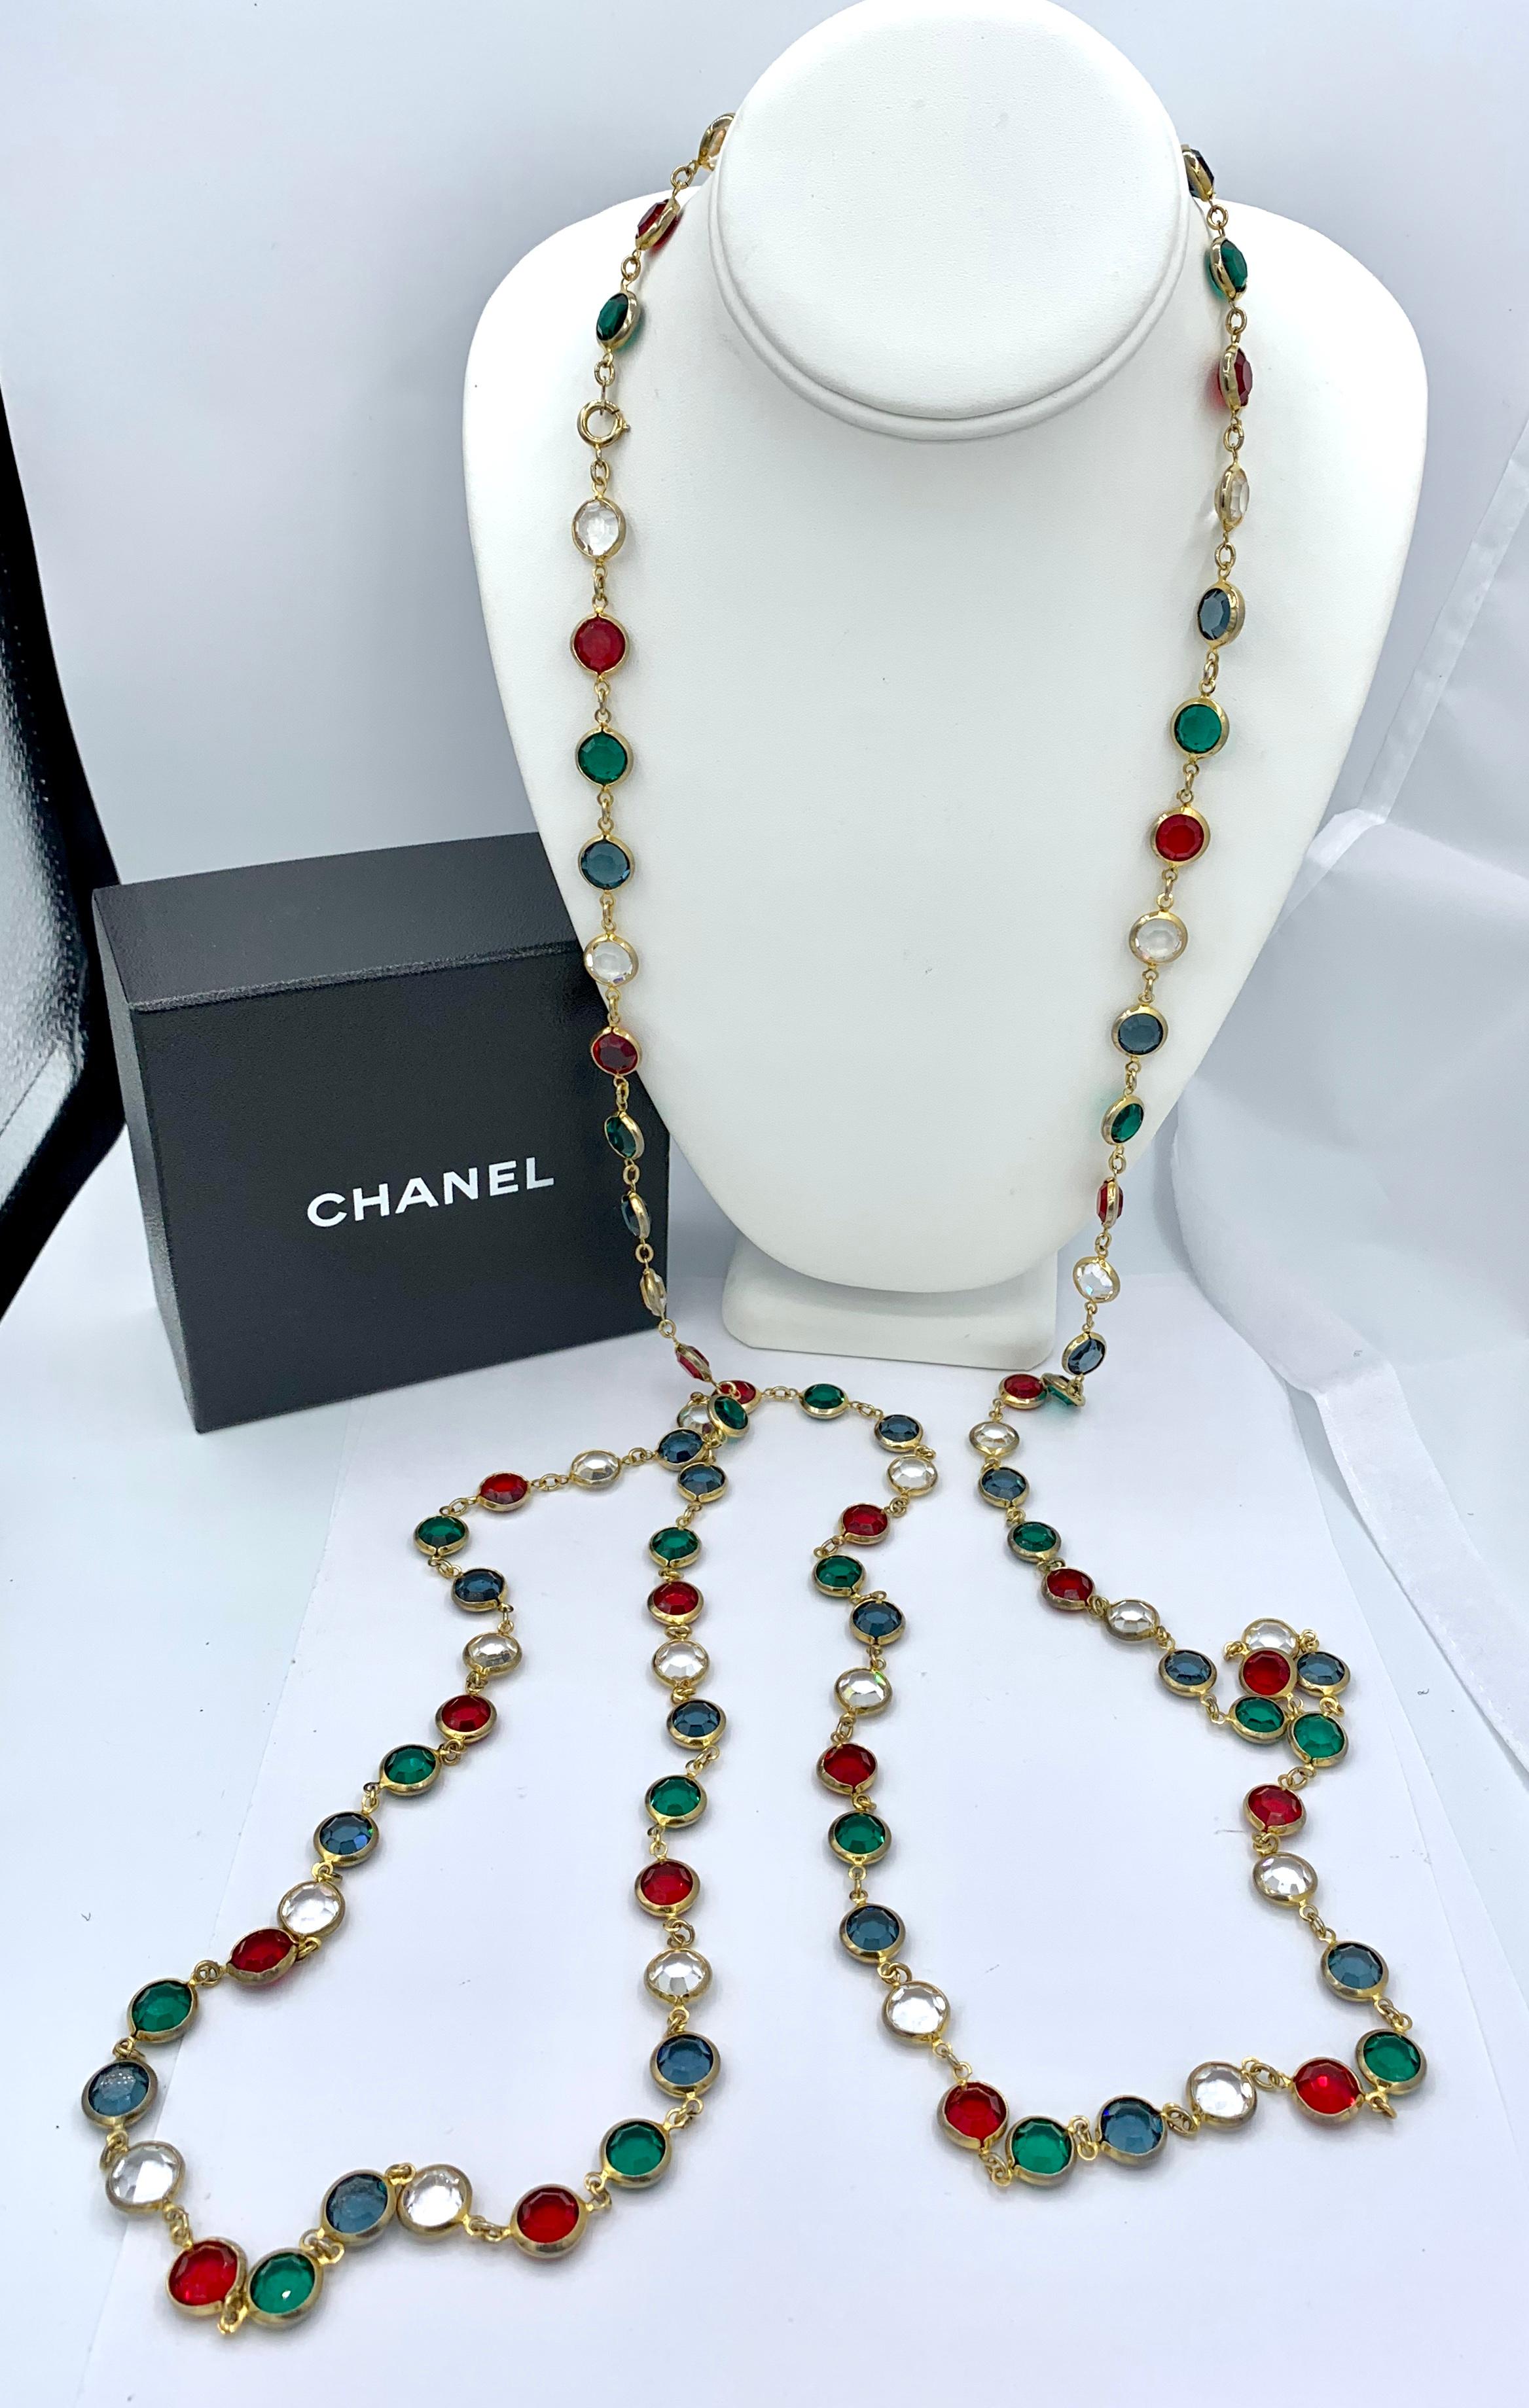 Two Chanel Gripoix Necklaces 1981 Signed Estate of Barbara Taylor Bradford For Sale 5